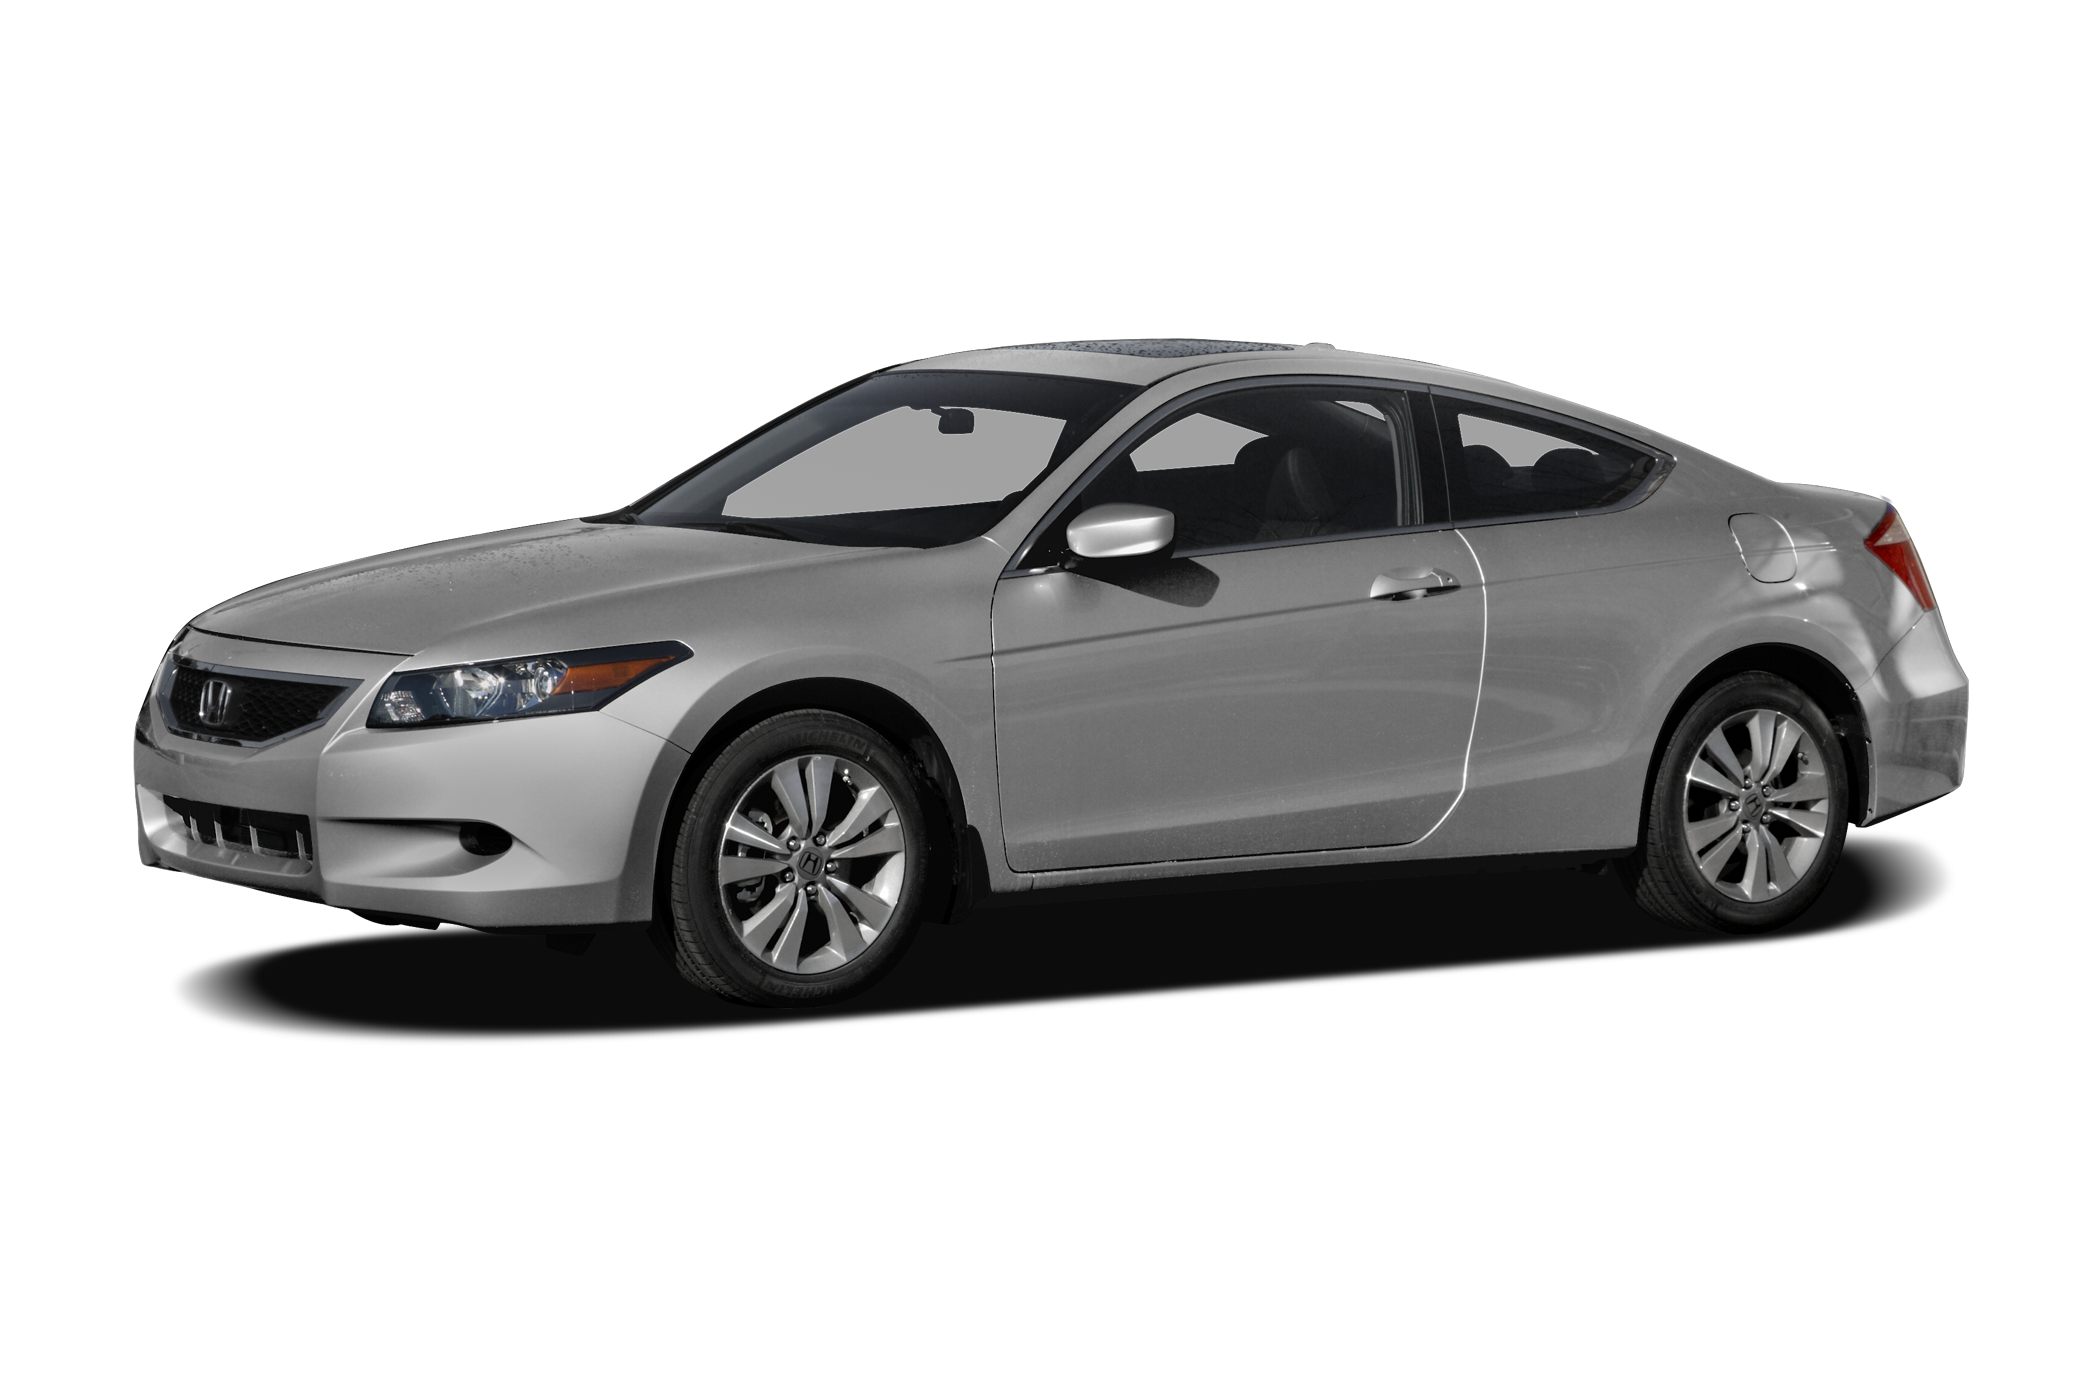 Great Deals On A New 2008 Honda Accord 24 Ex L 2dr Coupe At The